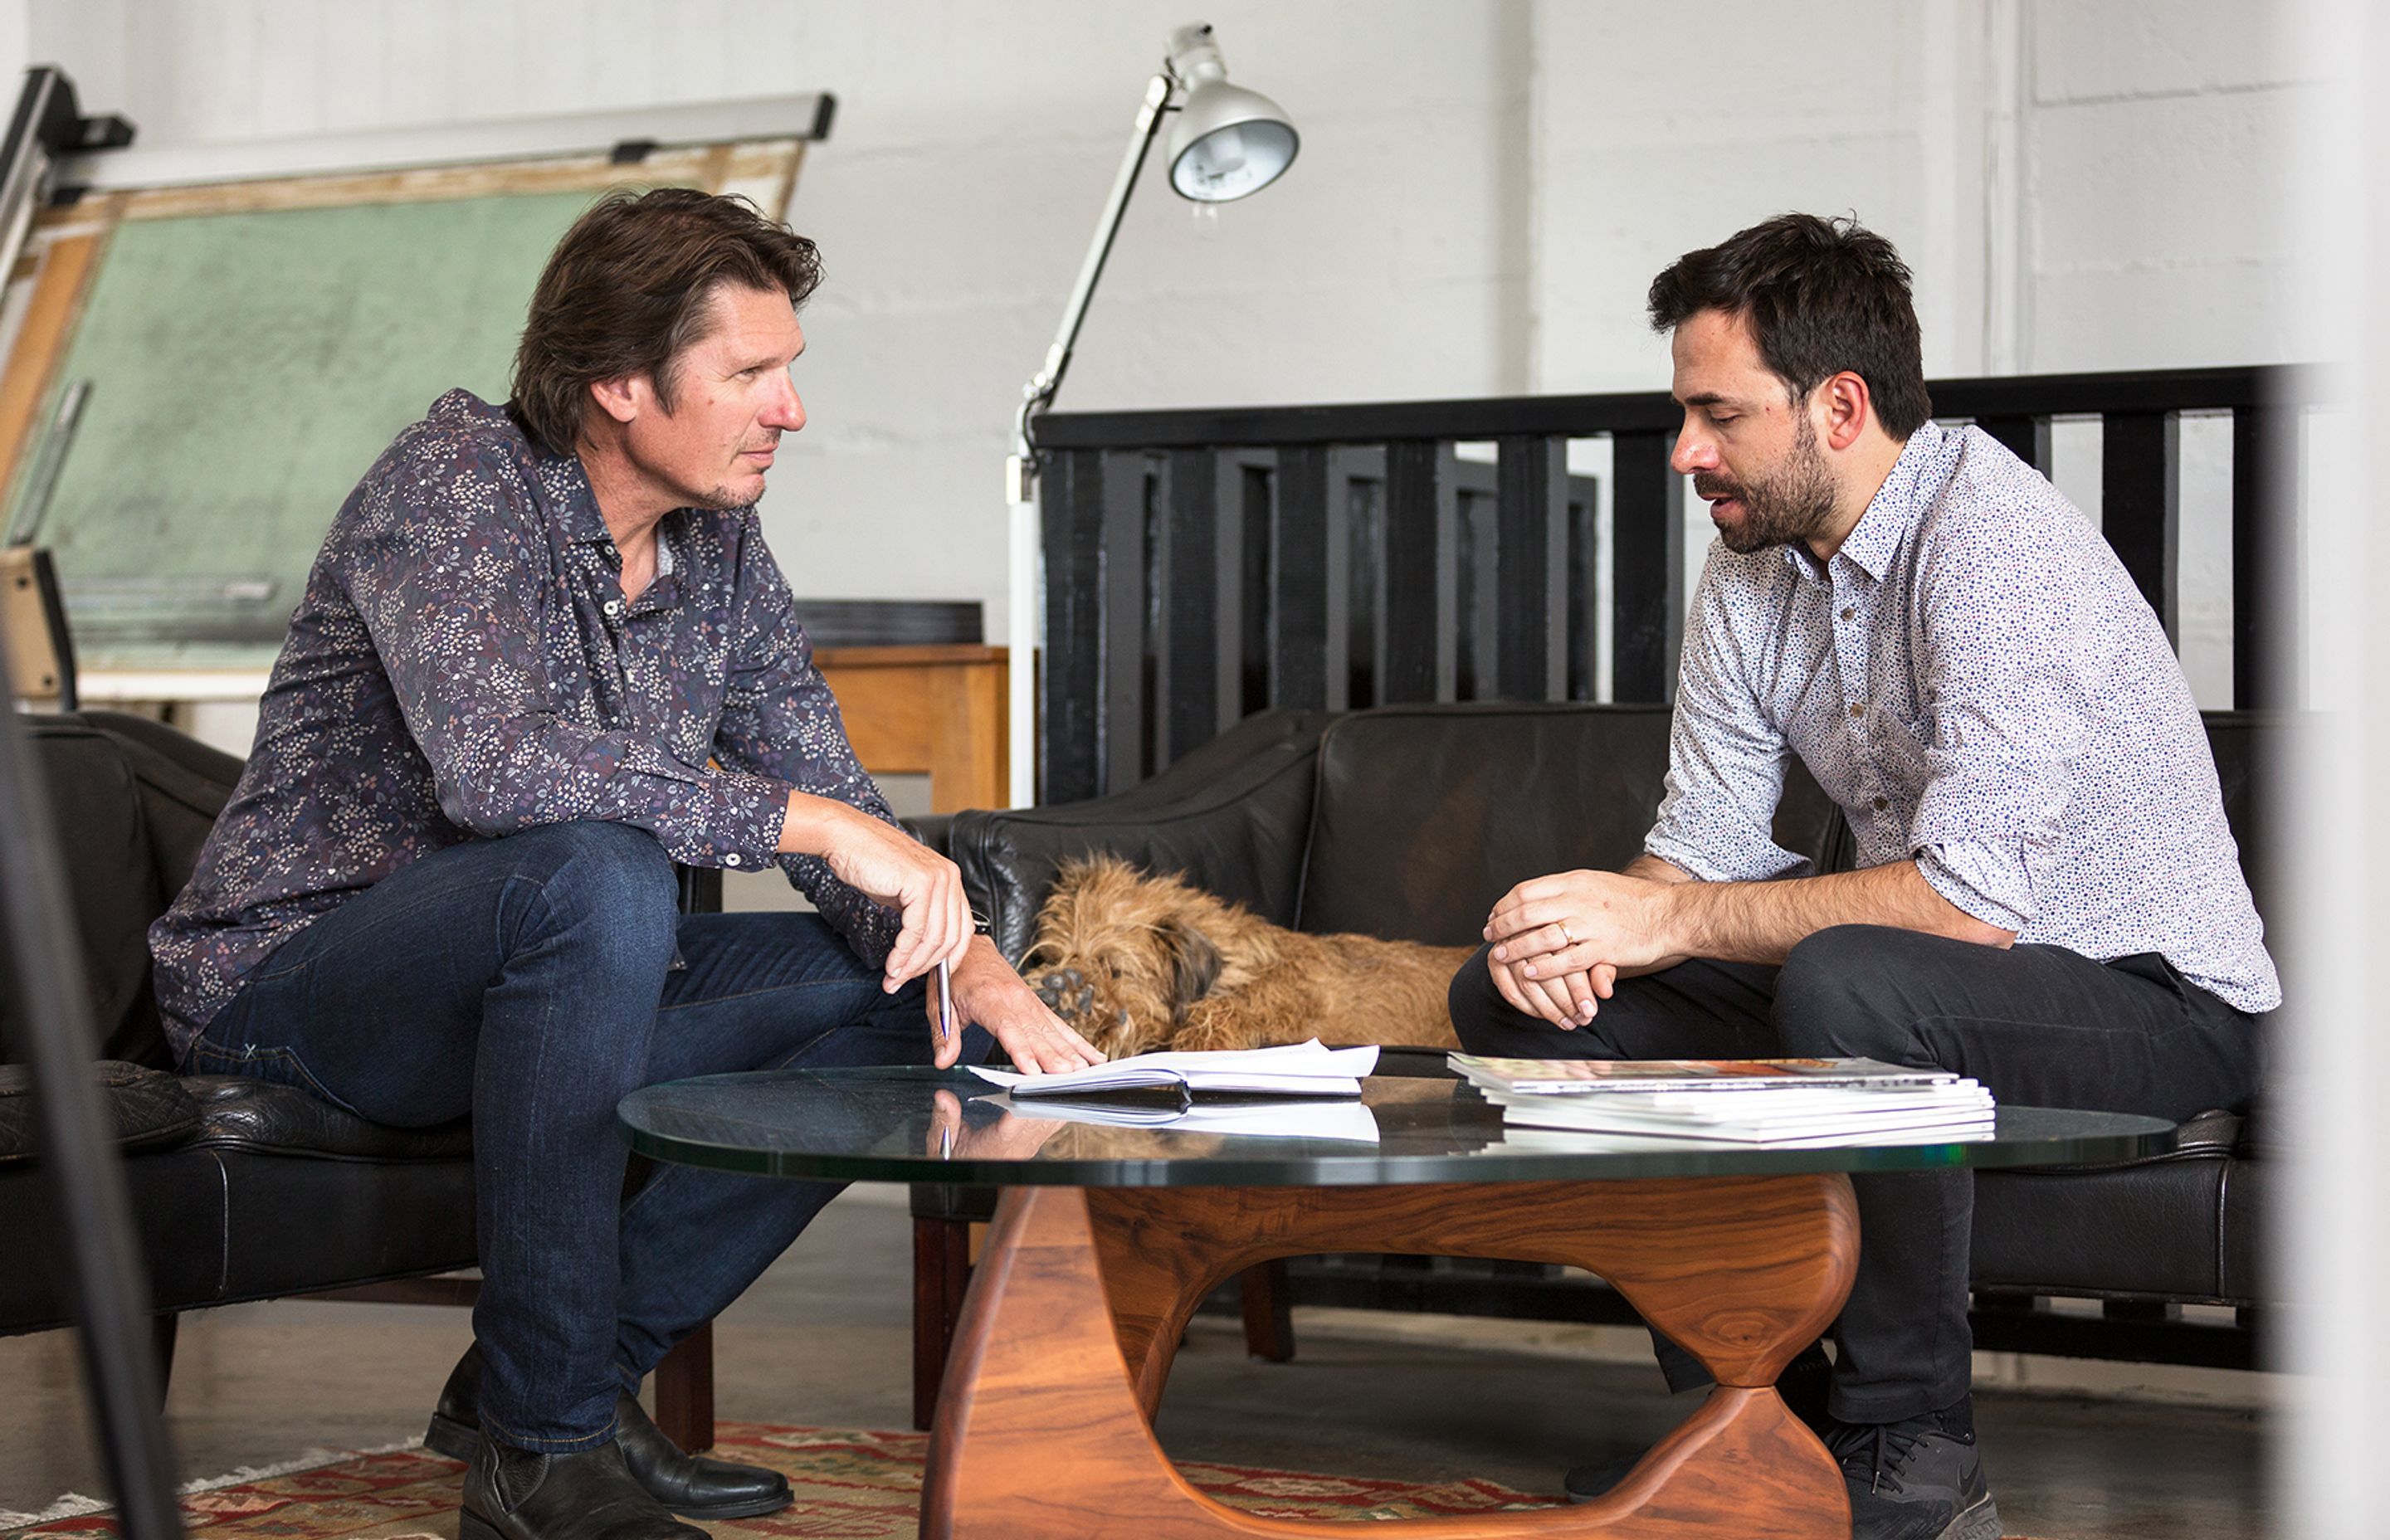 Directors of Hoxha Bailey Architects, Jason Bailey (left) and Pashtrik Hoxha (right) at their Ponsonby workspace.